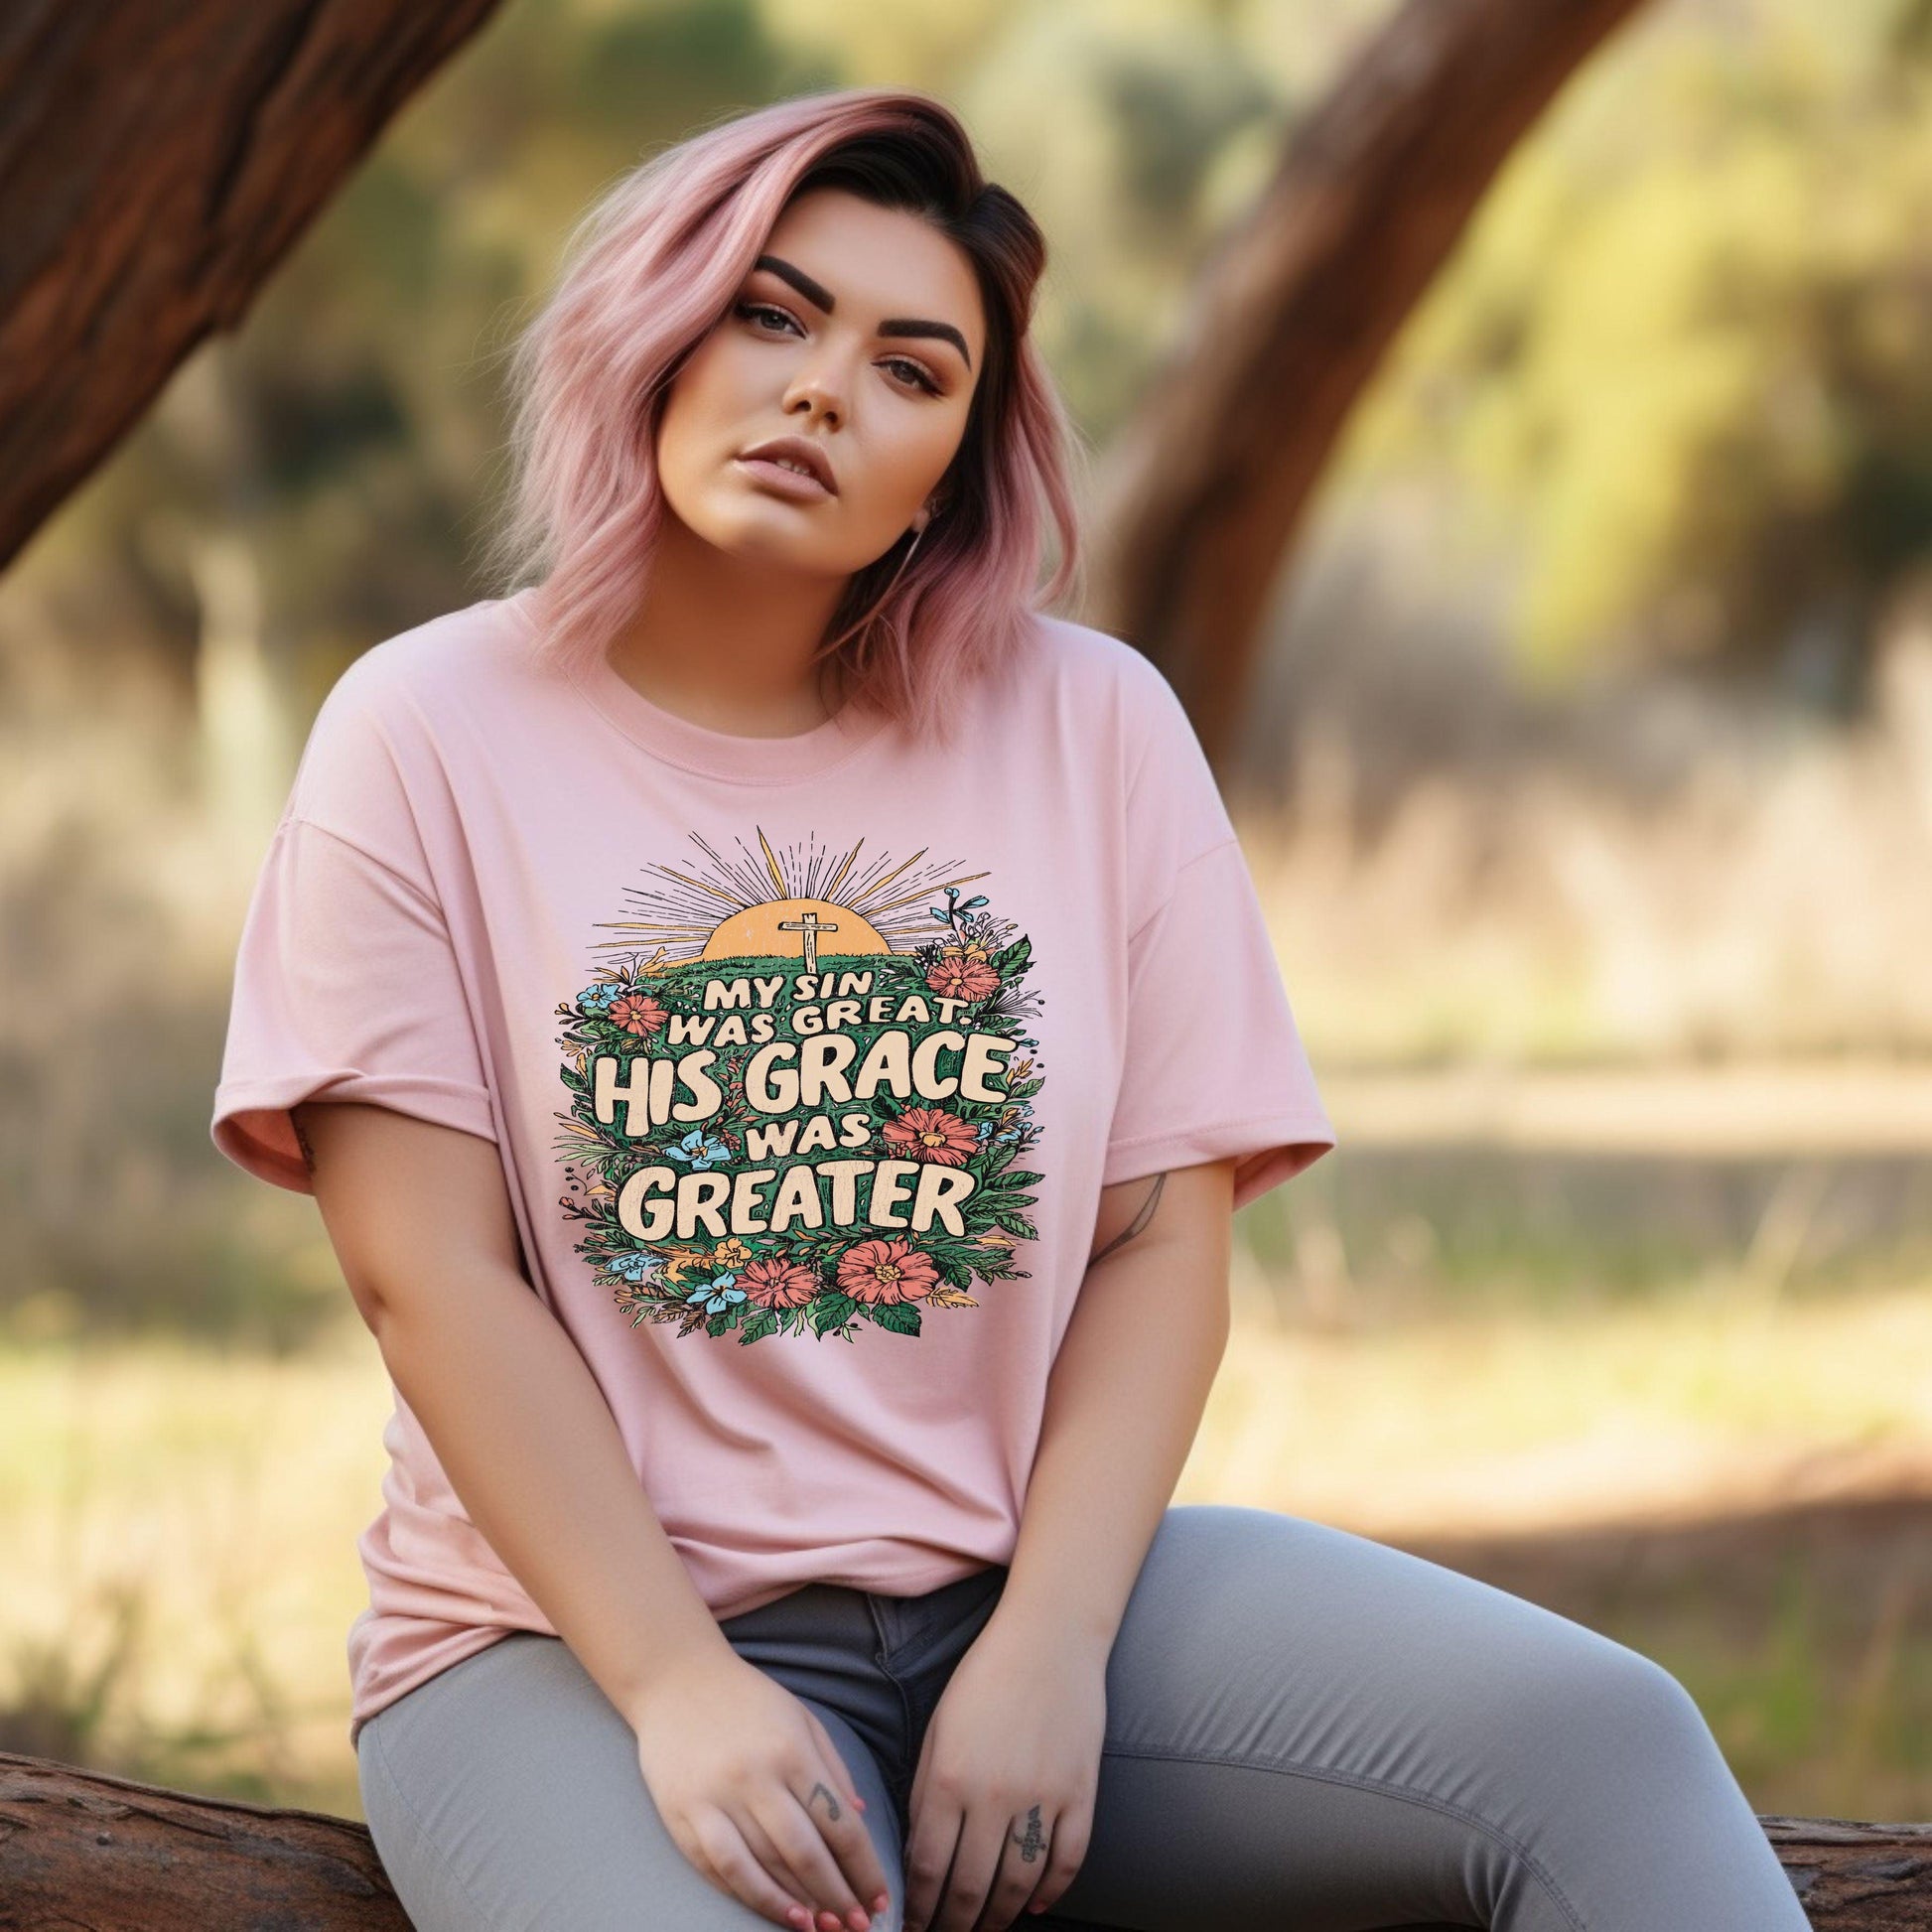 My Sin Was Great But His Grace Was Greater Women’s Plus Tee - JT Footprint Apparel